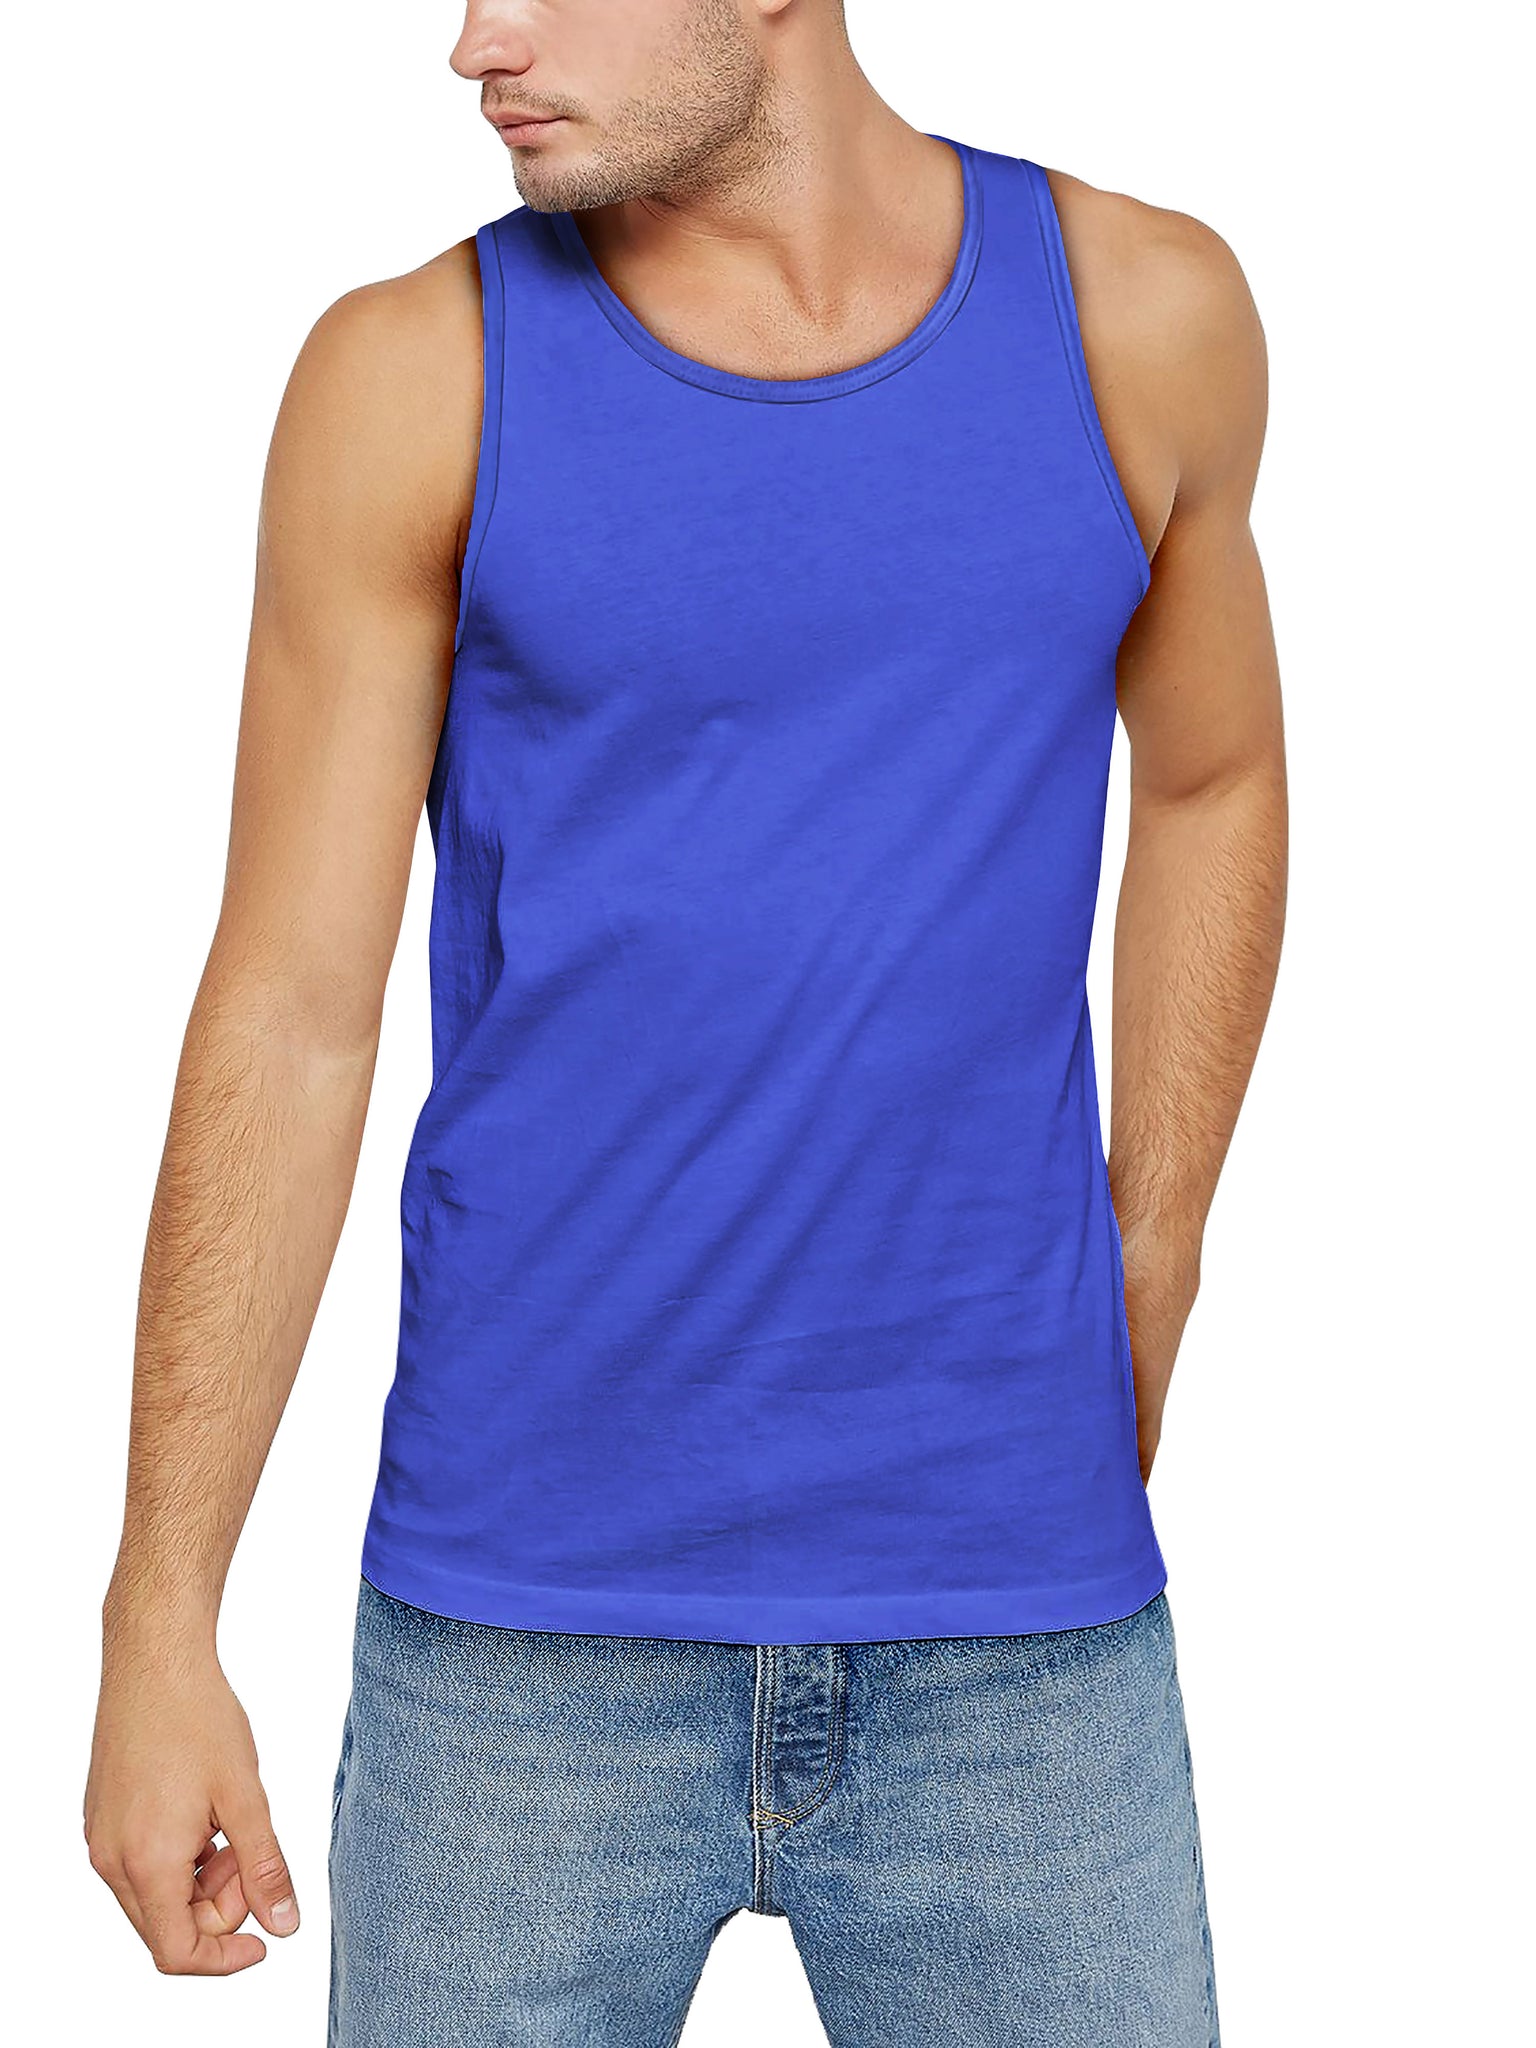 Mens Muscle Fit Tank Top - Shirts & Tops